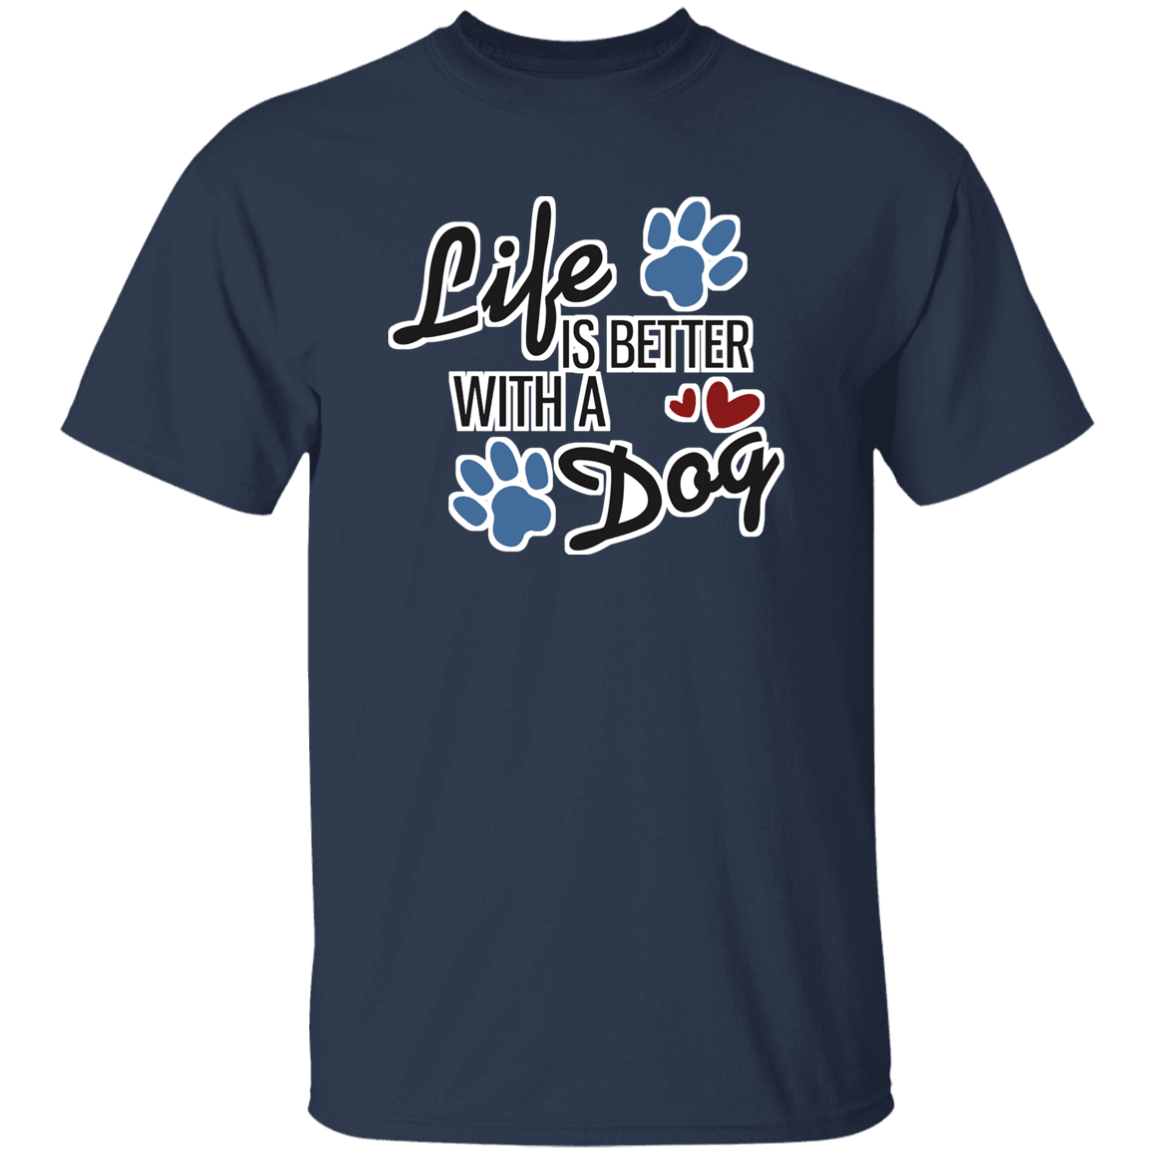 Life is Better with a Dog - Youth T-Shirt.